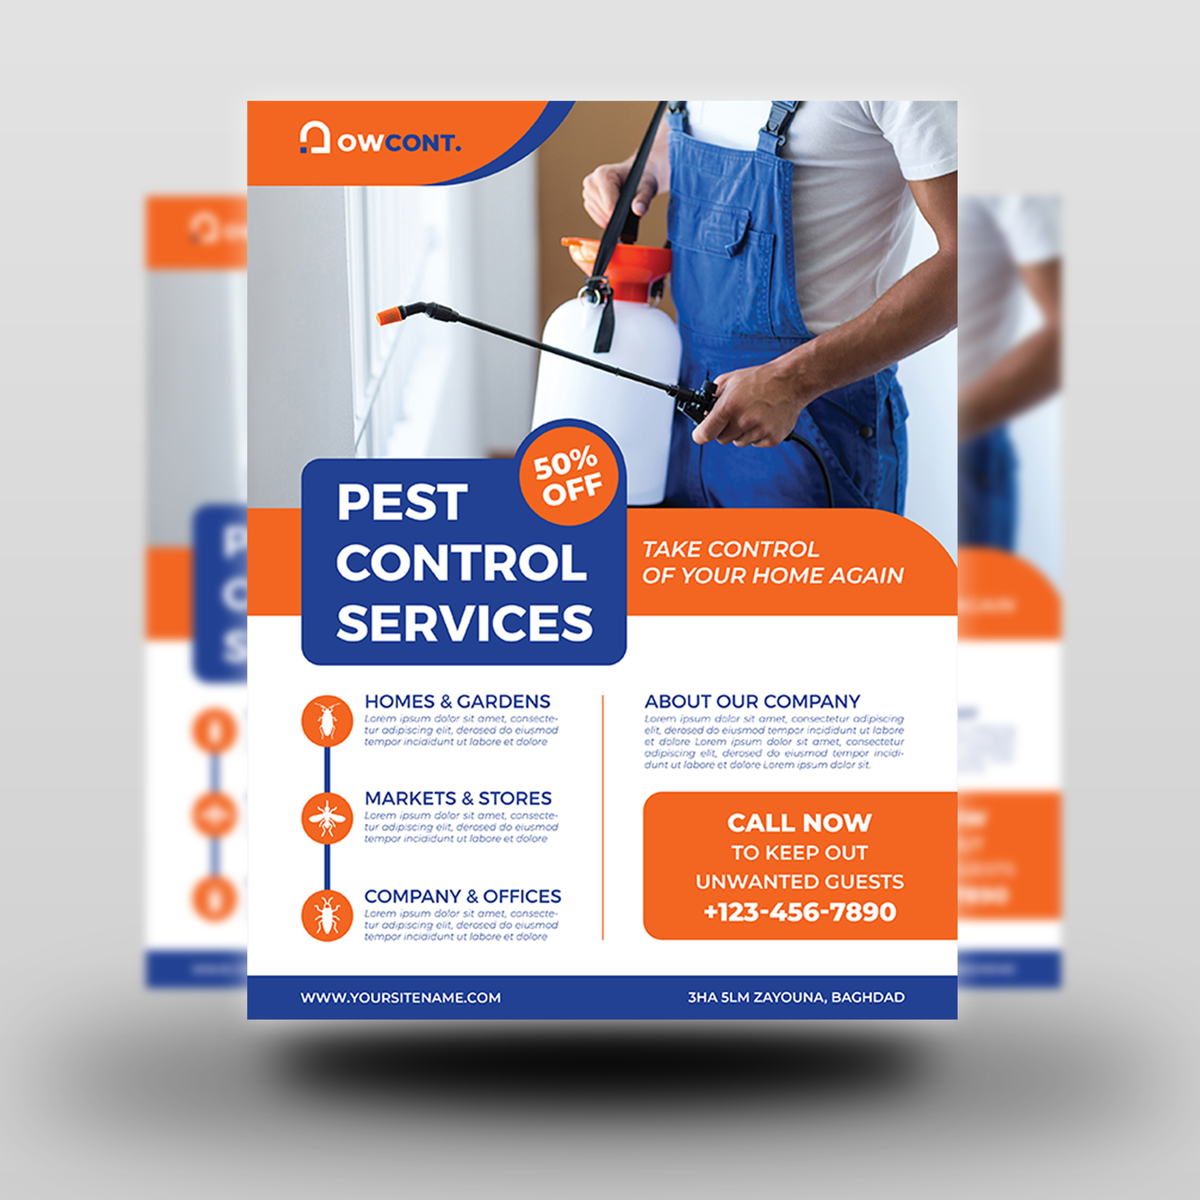 Pest Control Services Flyer Template by OWPictures on Dribbble